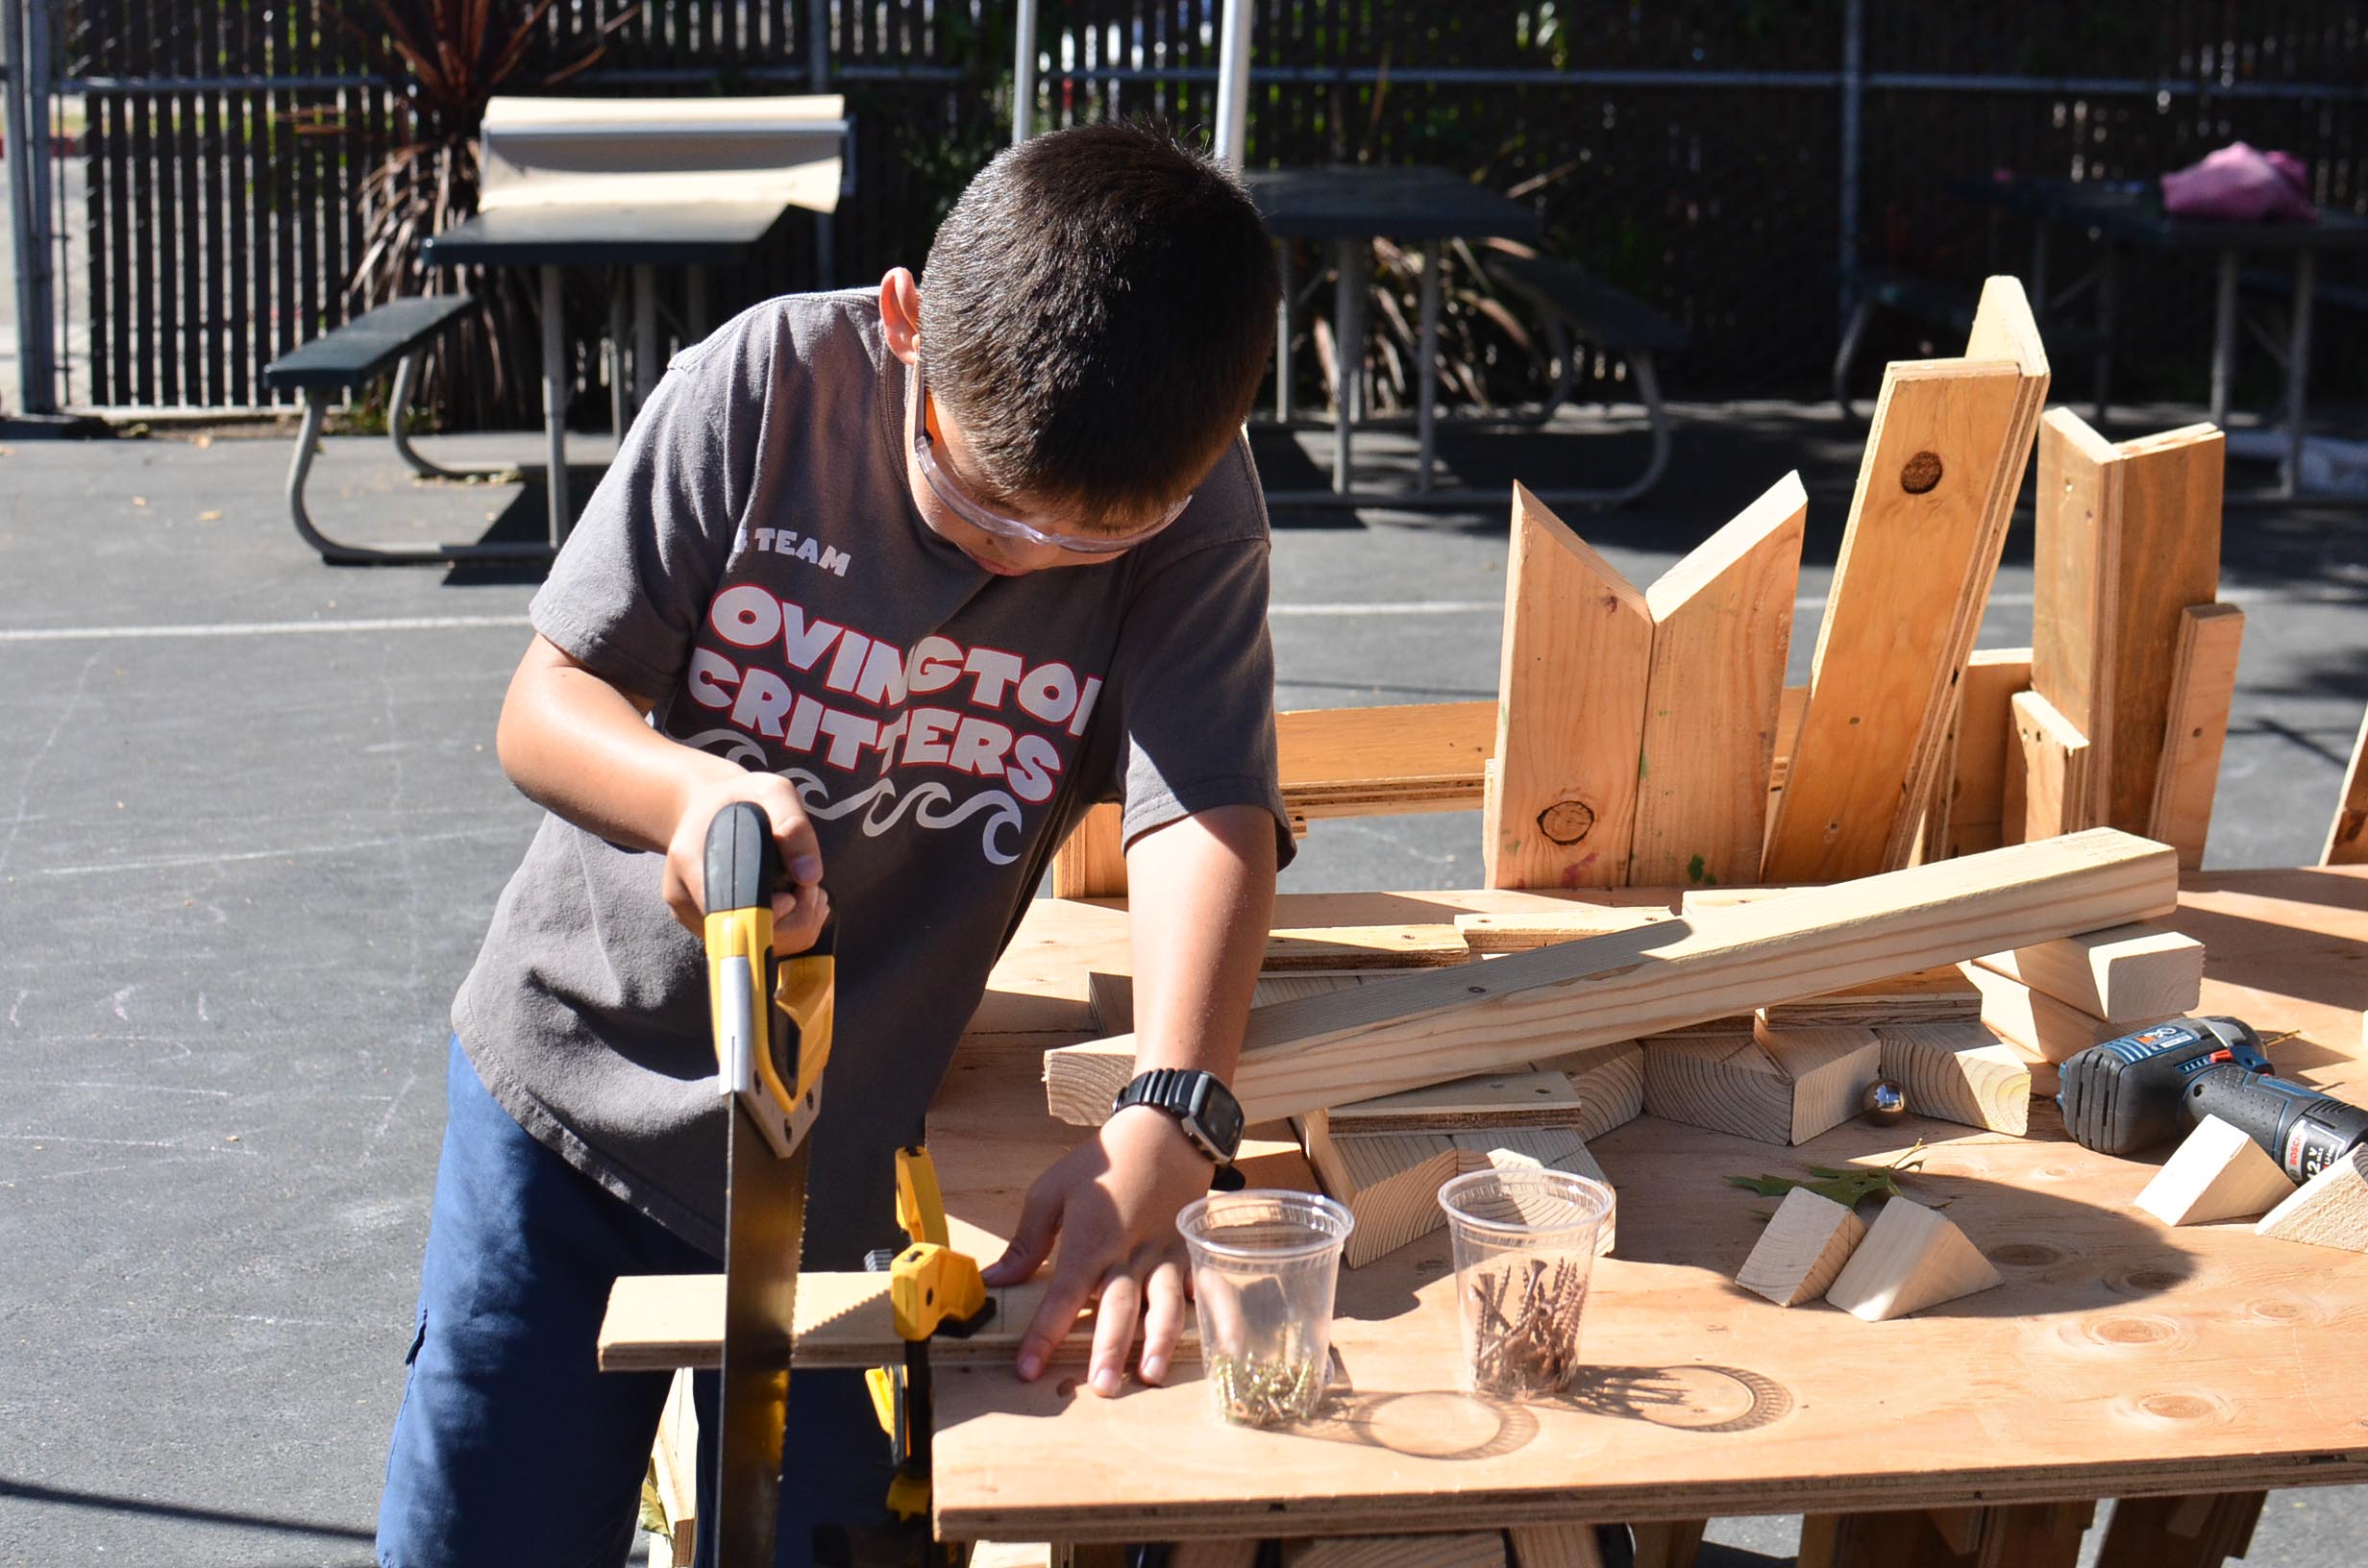  Kyle excelled with the handsaw and helped teach others who had never used it as well.&nbsp; 